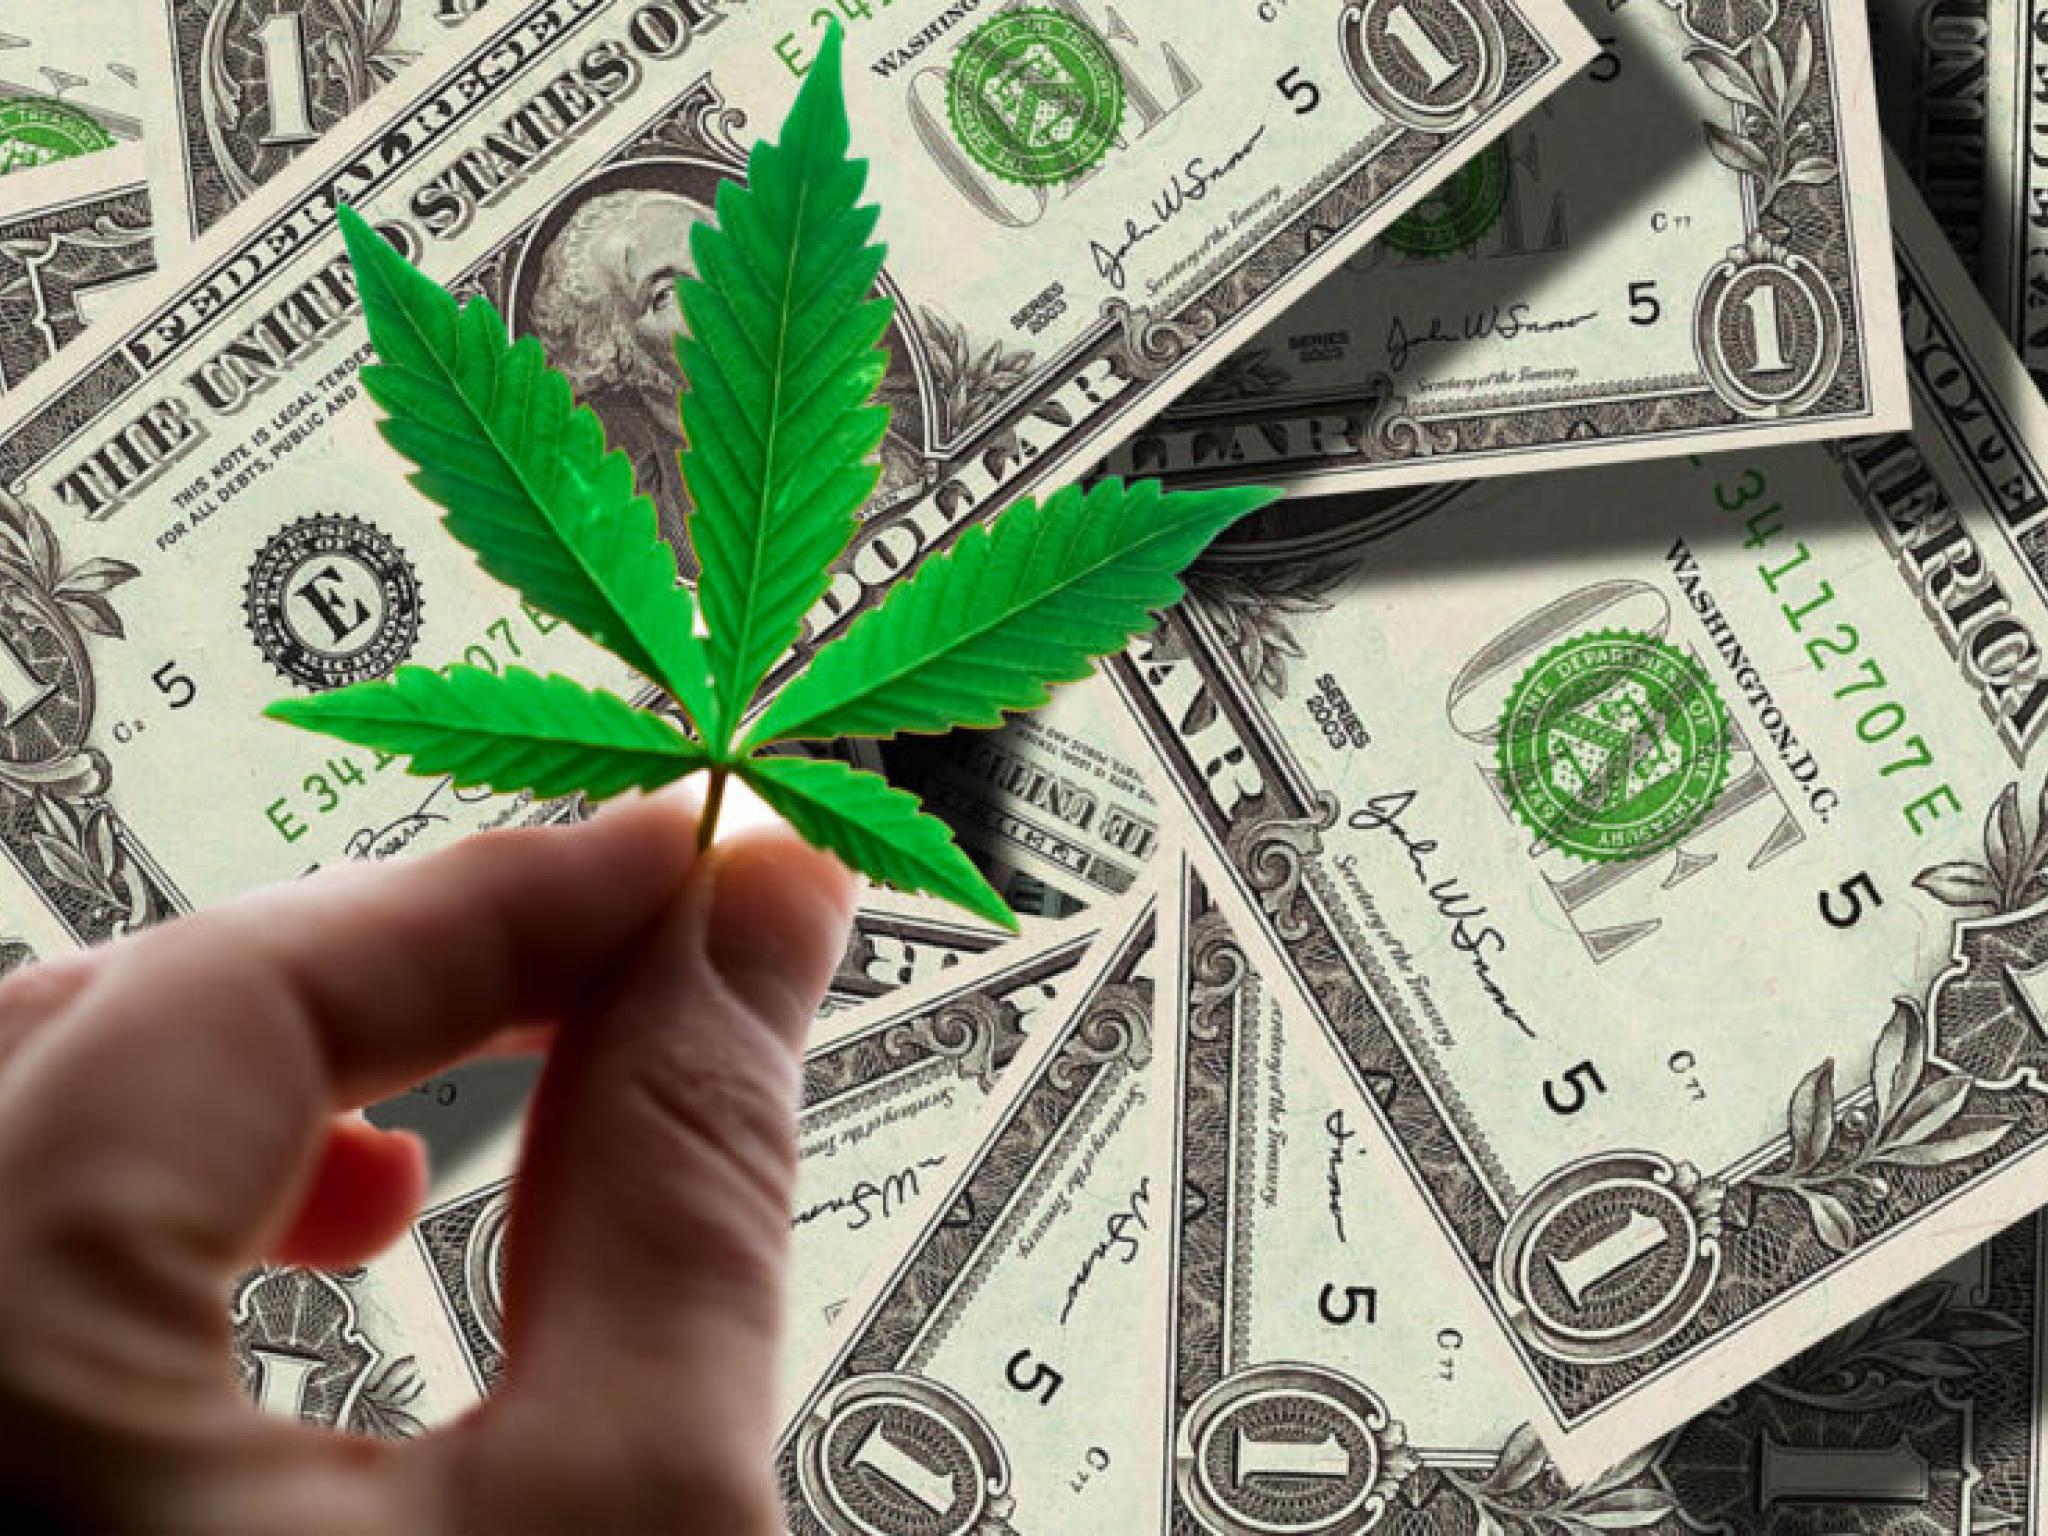  cannabis-company-4front-reports-28-yoy-drop-in-q1-revenue-while-net-loss-grows-ceo-optimistic-with-bidens-marijuana-rescheduling-news 